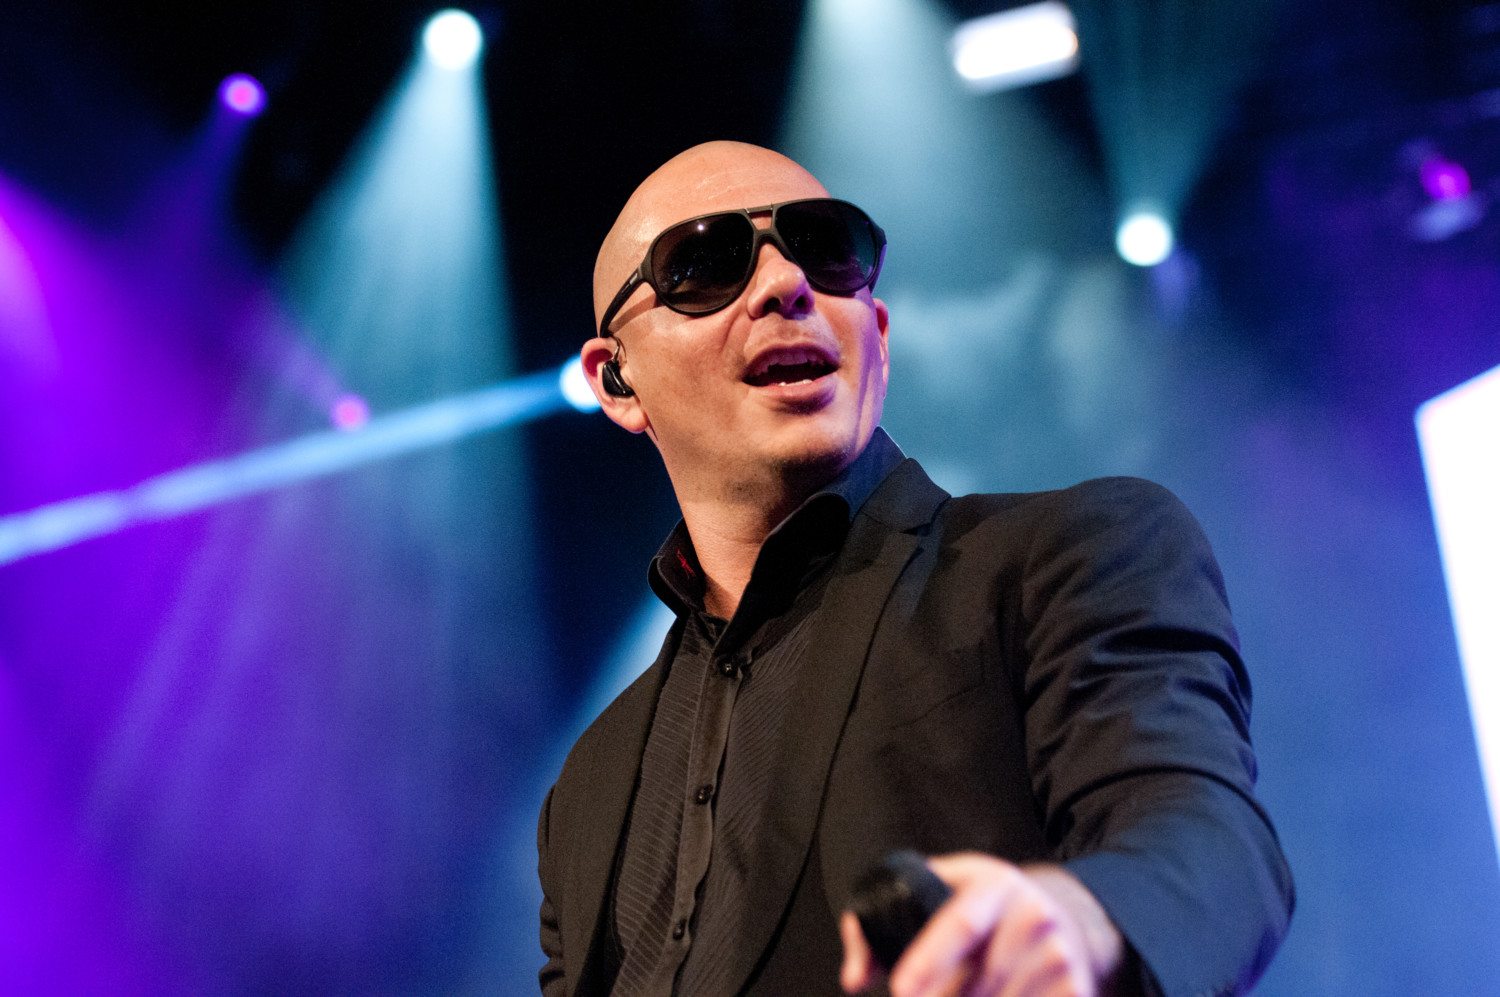 Pitbull With Prince Royce And Jump Smokers In Concert